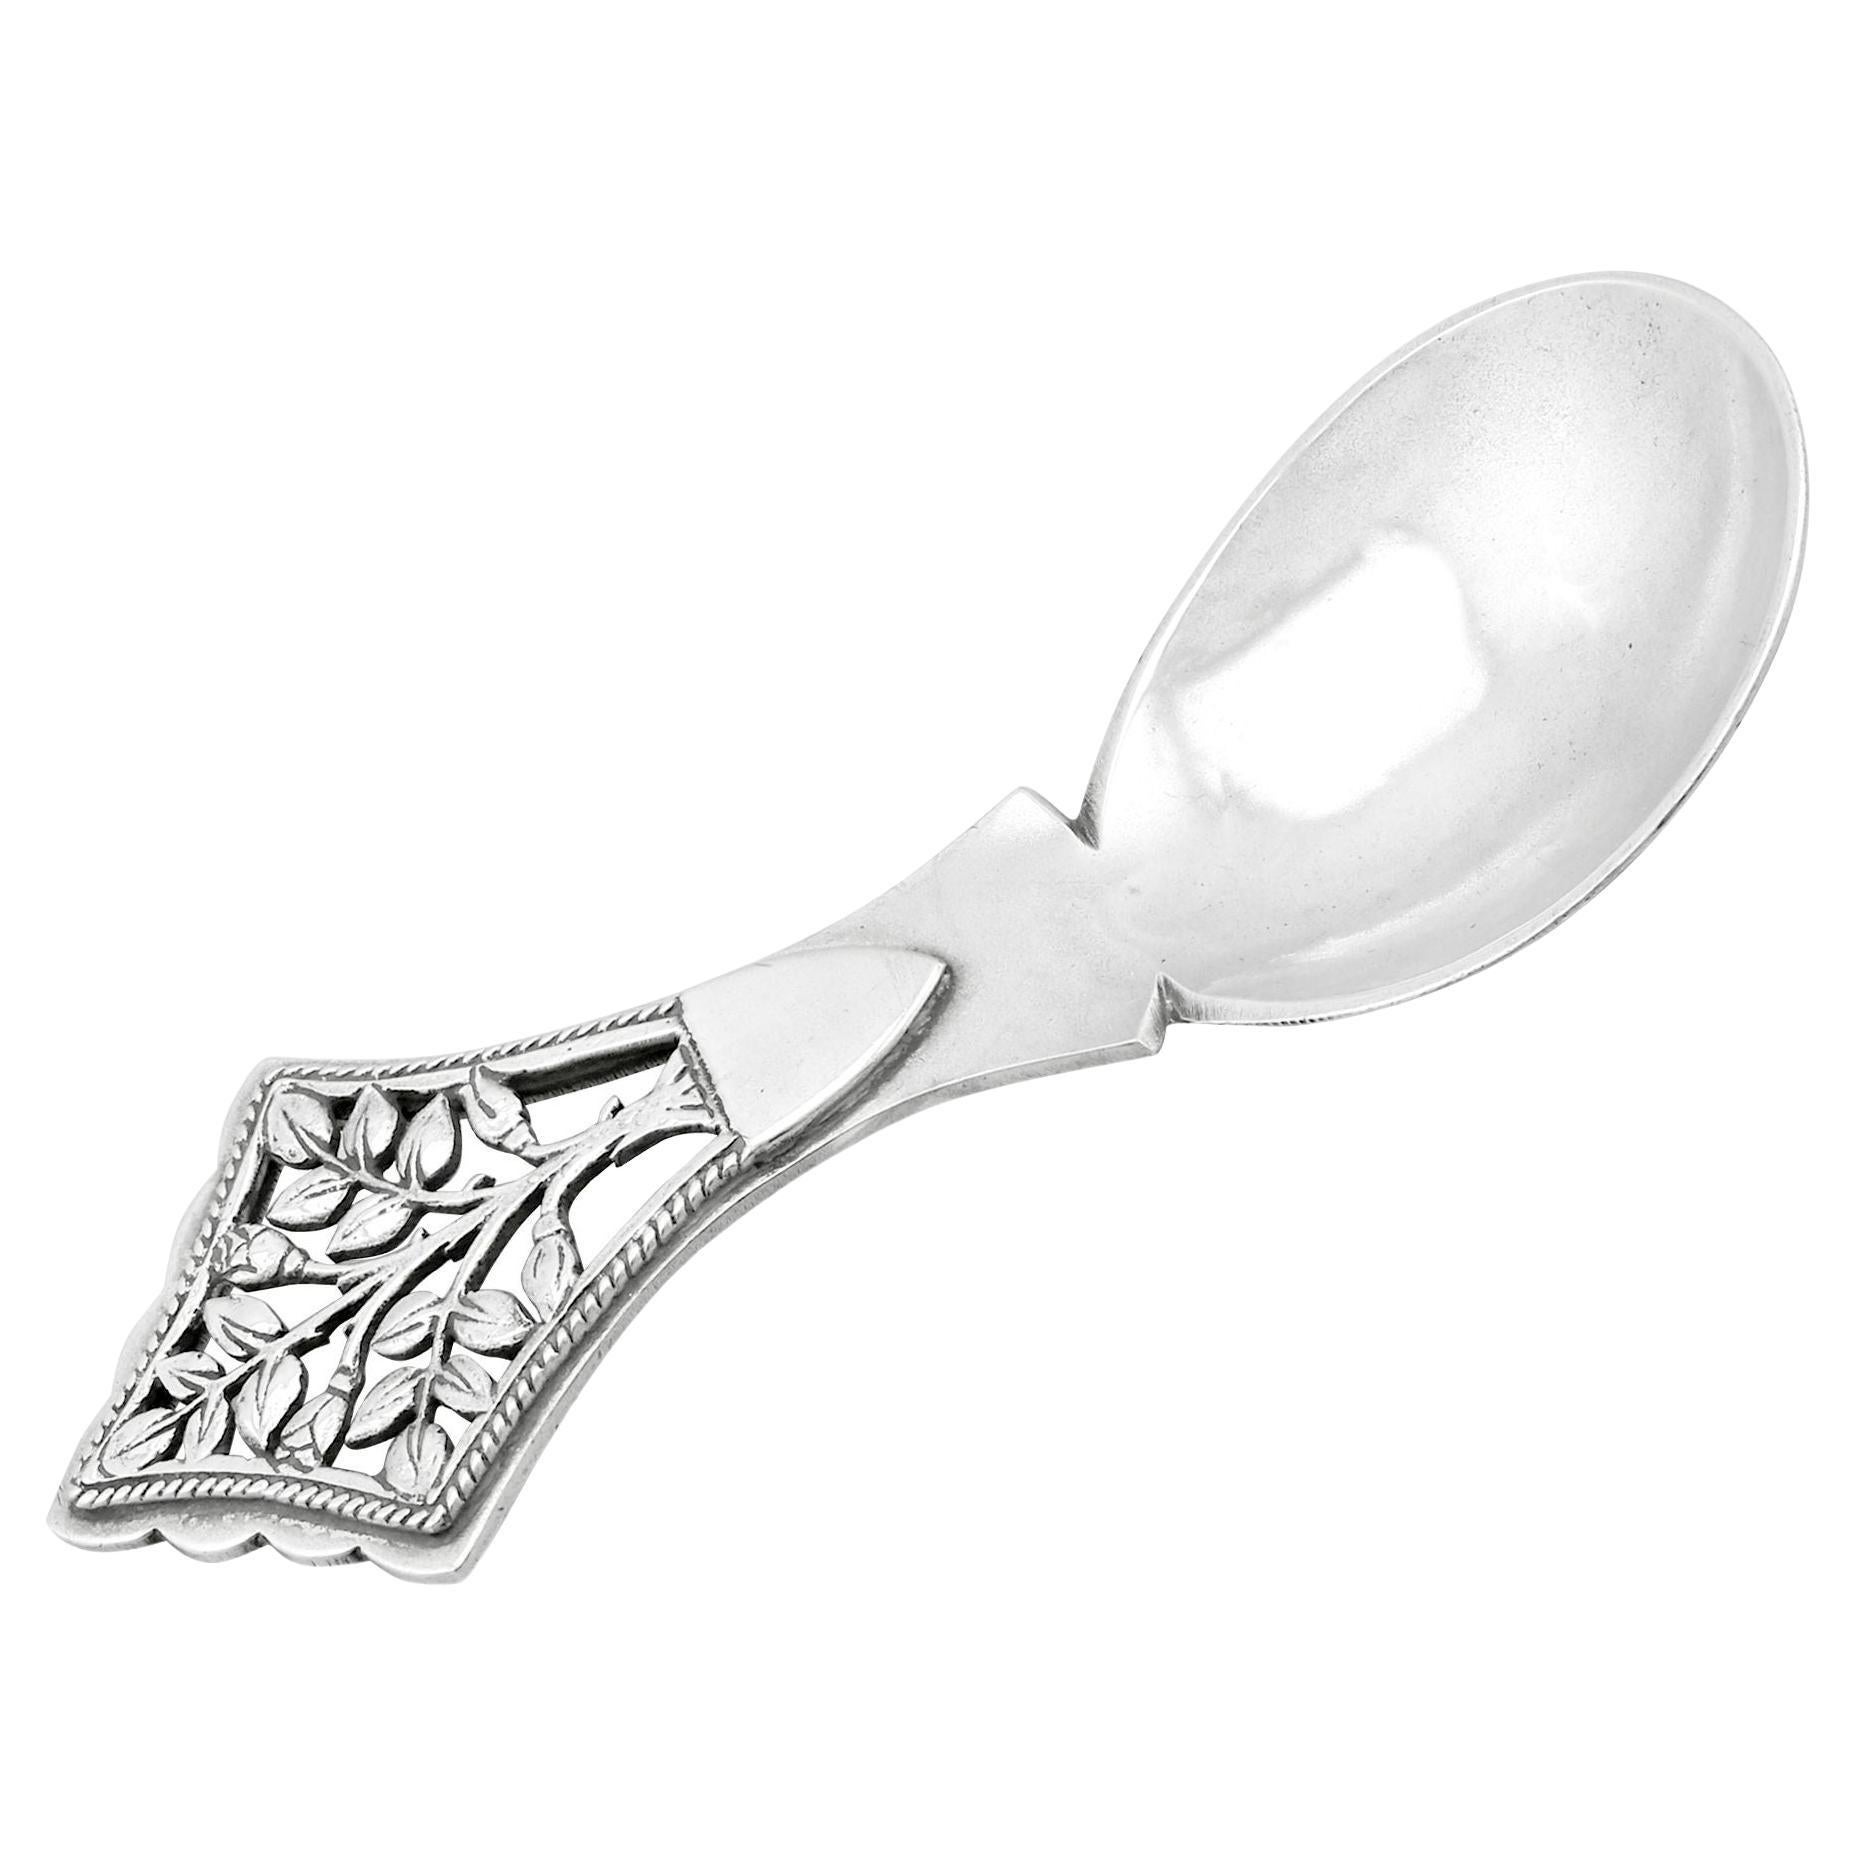 1929 Antique Sterling Silver Caddy Spoon by Henry George Murphy For Sale